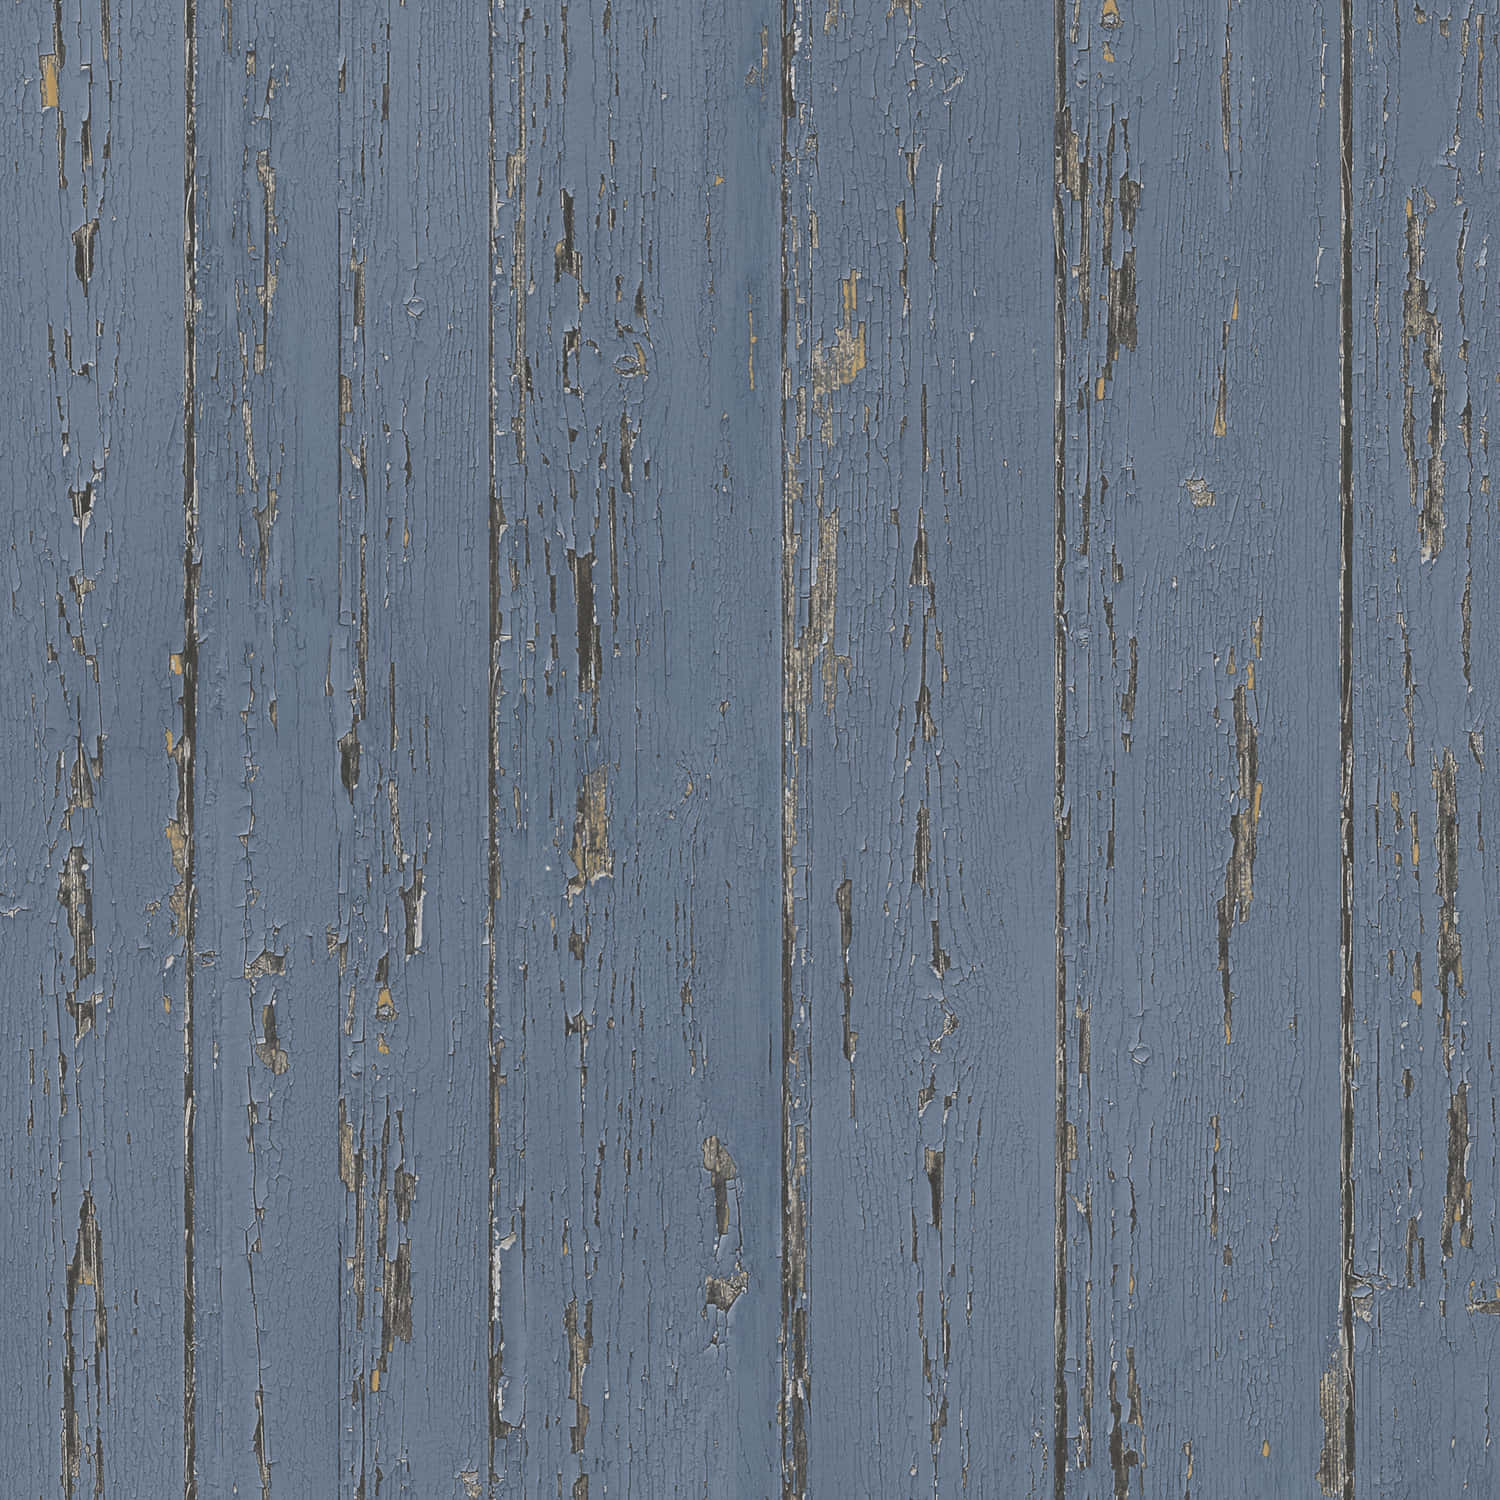 A Blue Painted Wooden Wall With A Yellow Paint